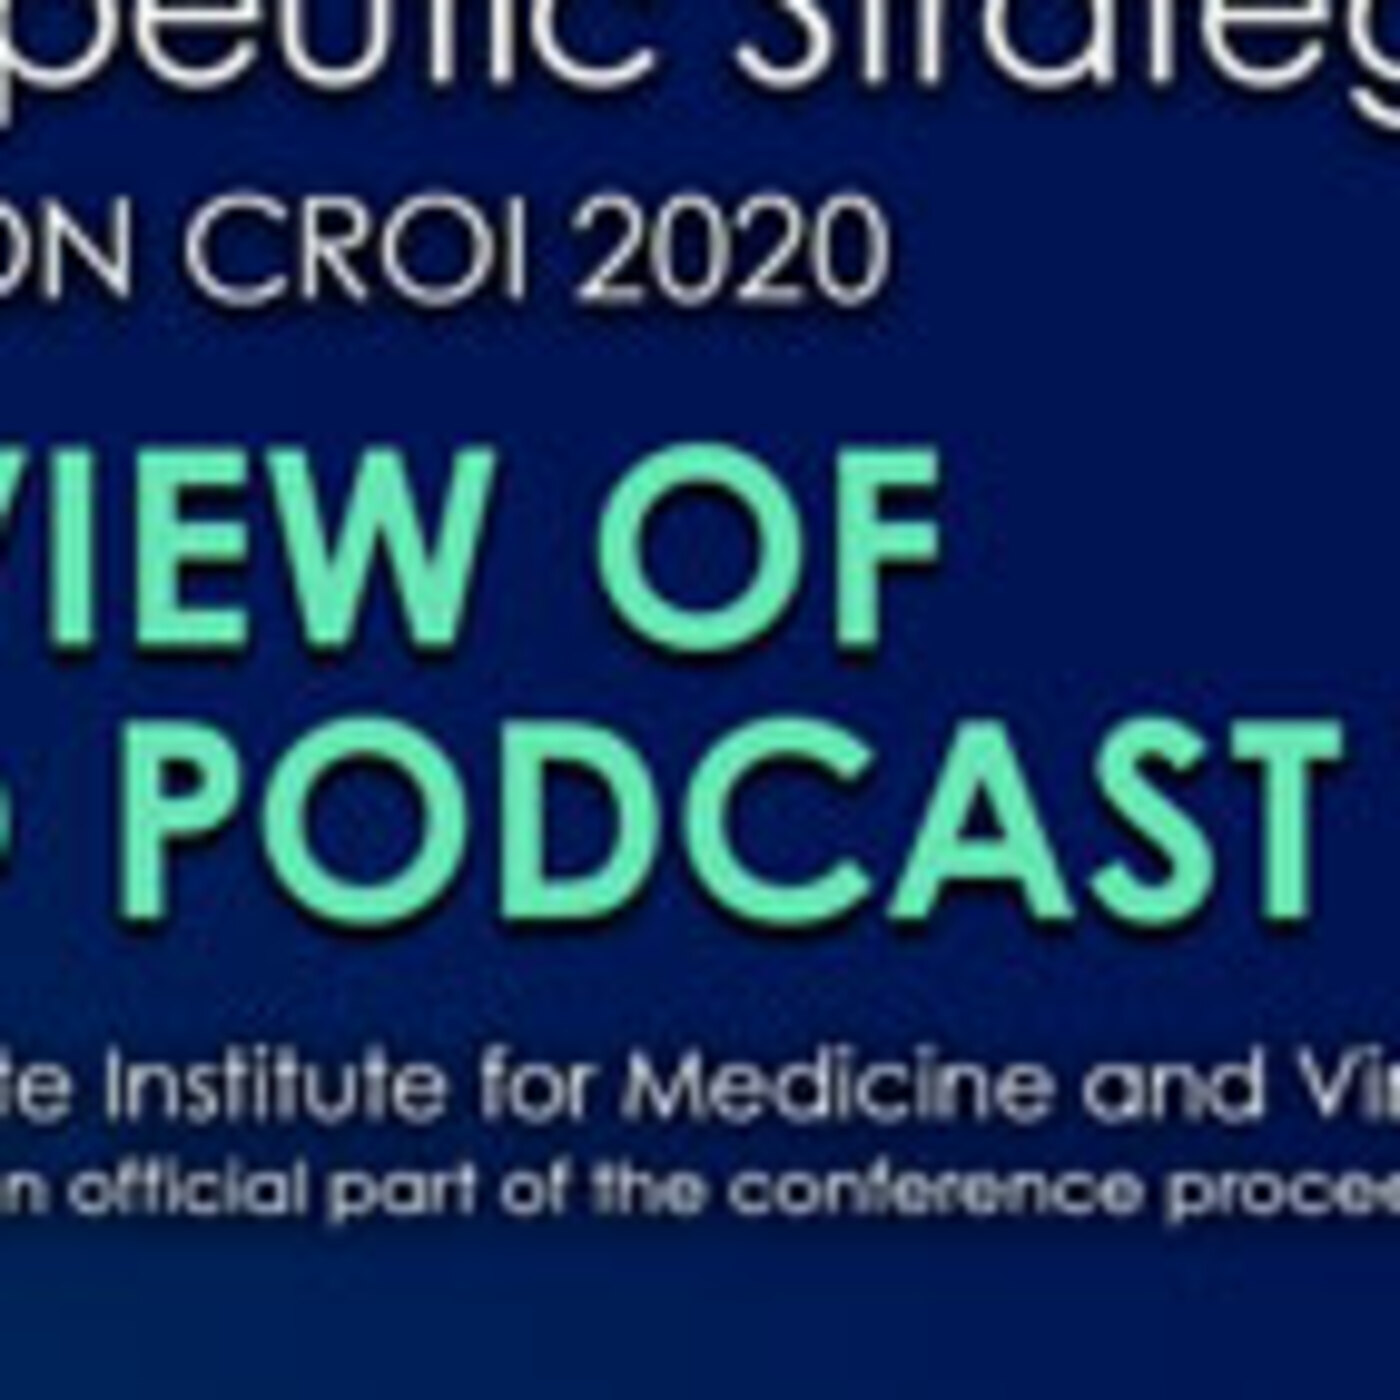 Rapid-Fire Review of CROI 2020